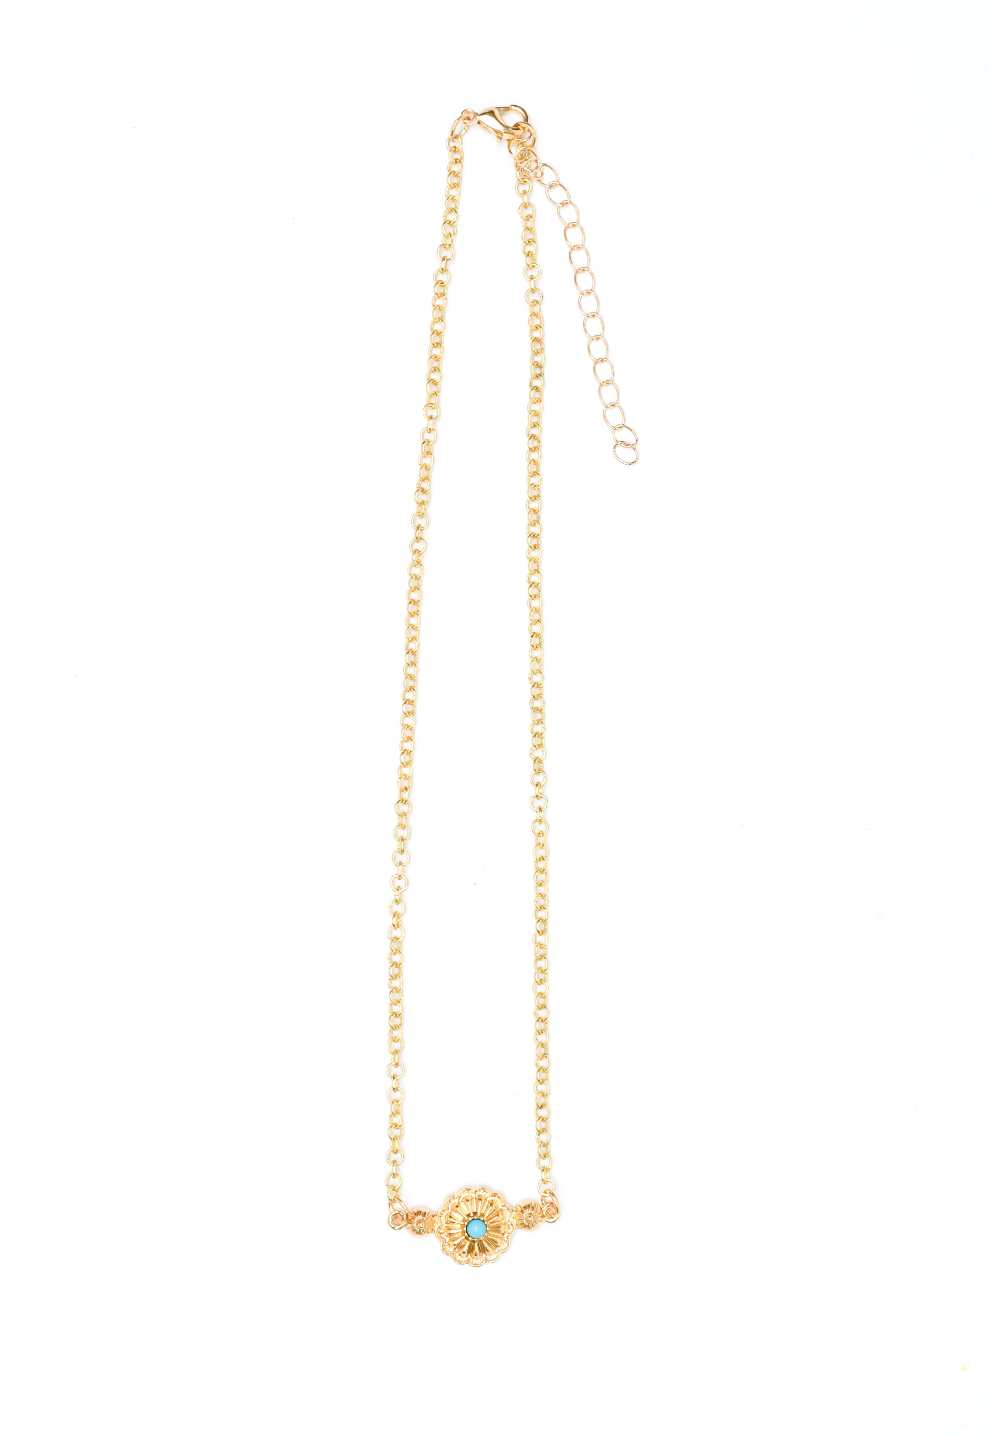 16" Gold Chain Necklace with Flower Concho Pendant